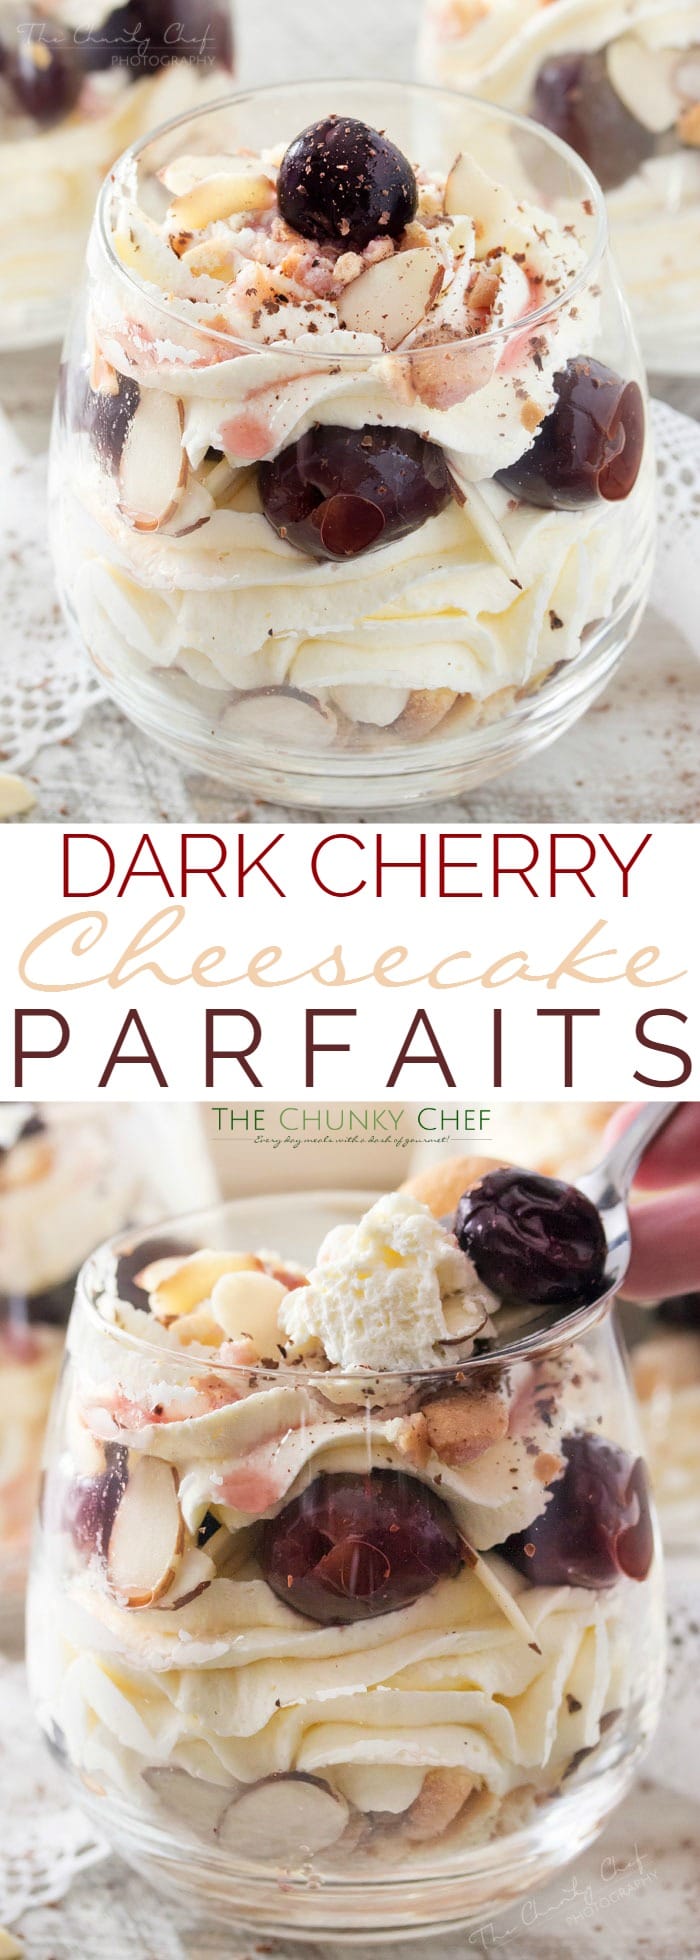 No Bake Cherry Cheesecake Parfaits | For a fast and easy no bake dessert, try these sweet cherry cheesecake parfaits! Ready in about 15 minutes, it's a great last minute dessert idea! | http://thechunkychef.com